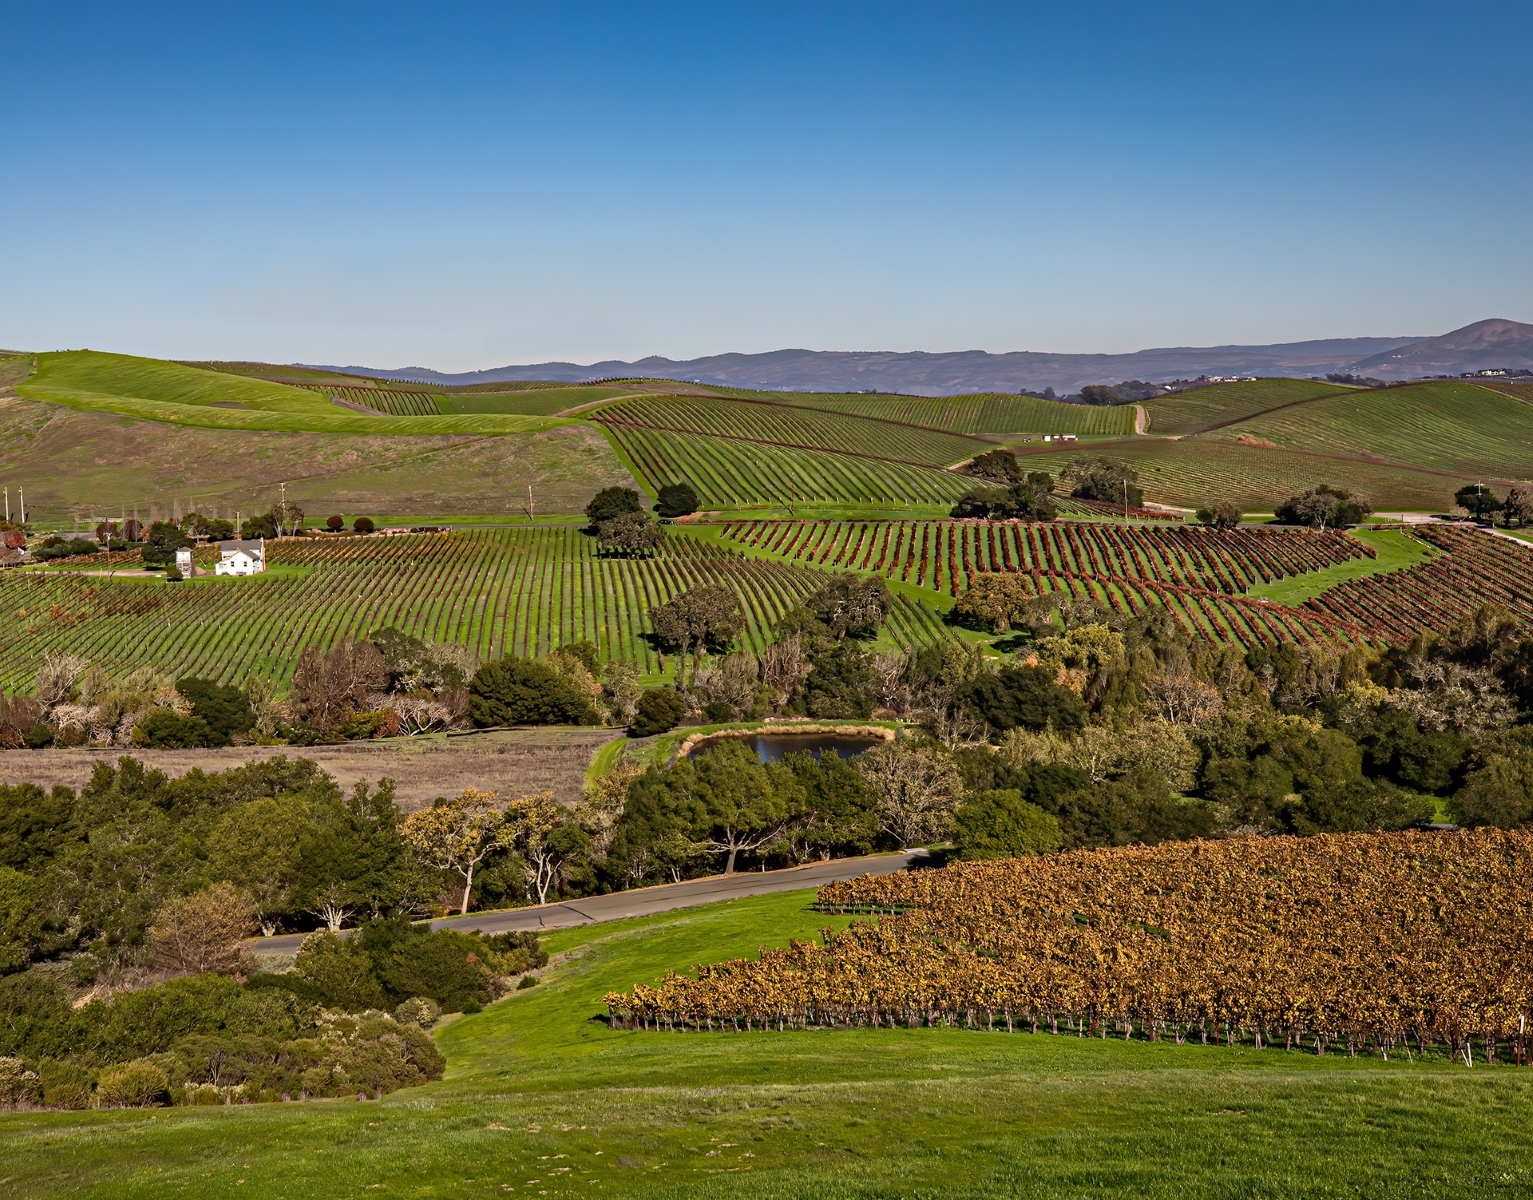 Autumn-view-from-the-Artesa-Winery-Carneros-District-Napa-Valley.-PB-1-Place-by-Bruce-Lescher-LV